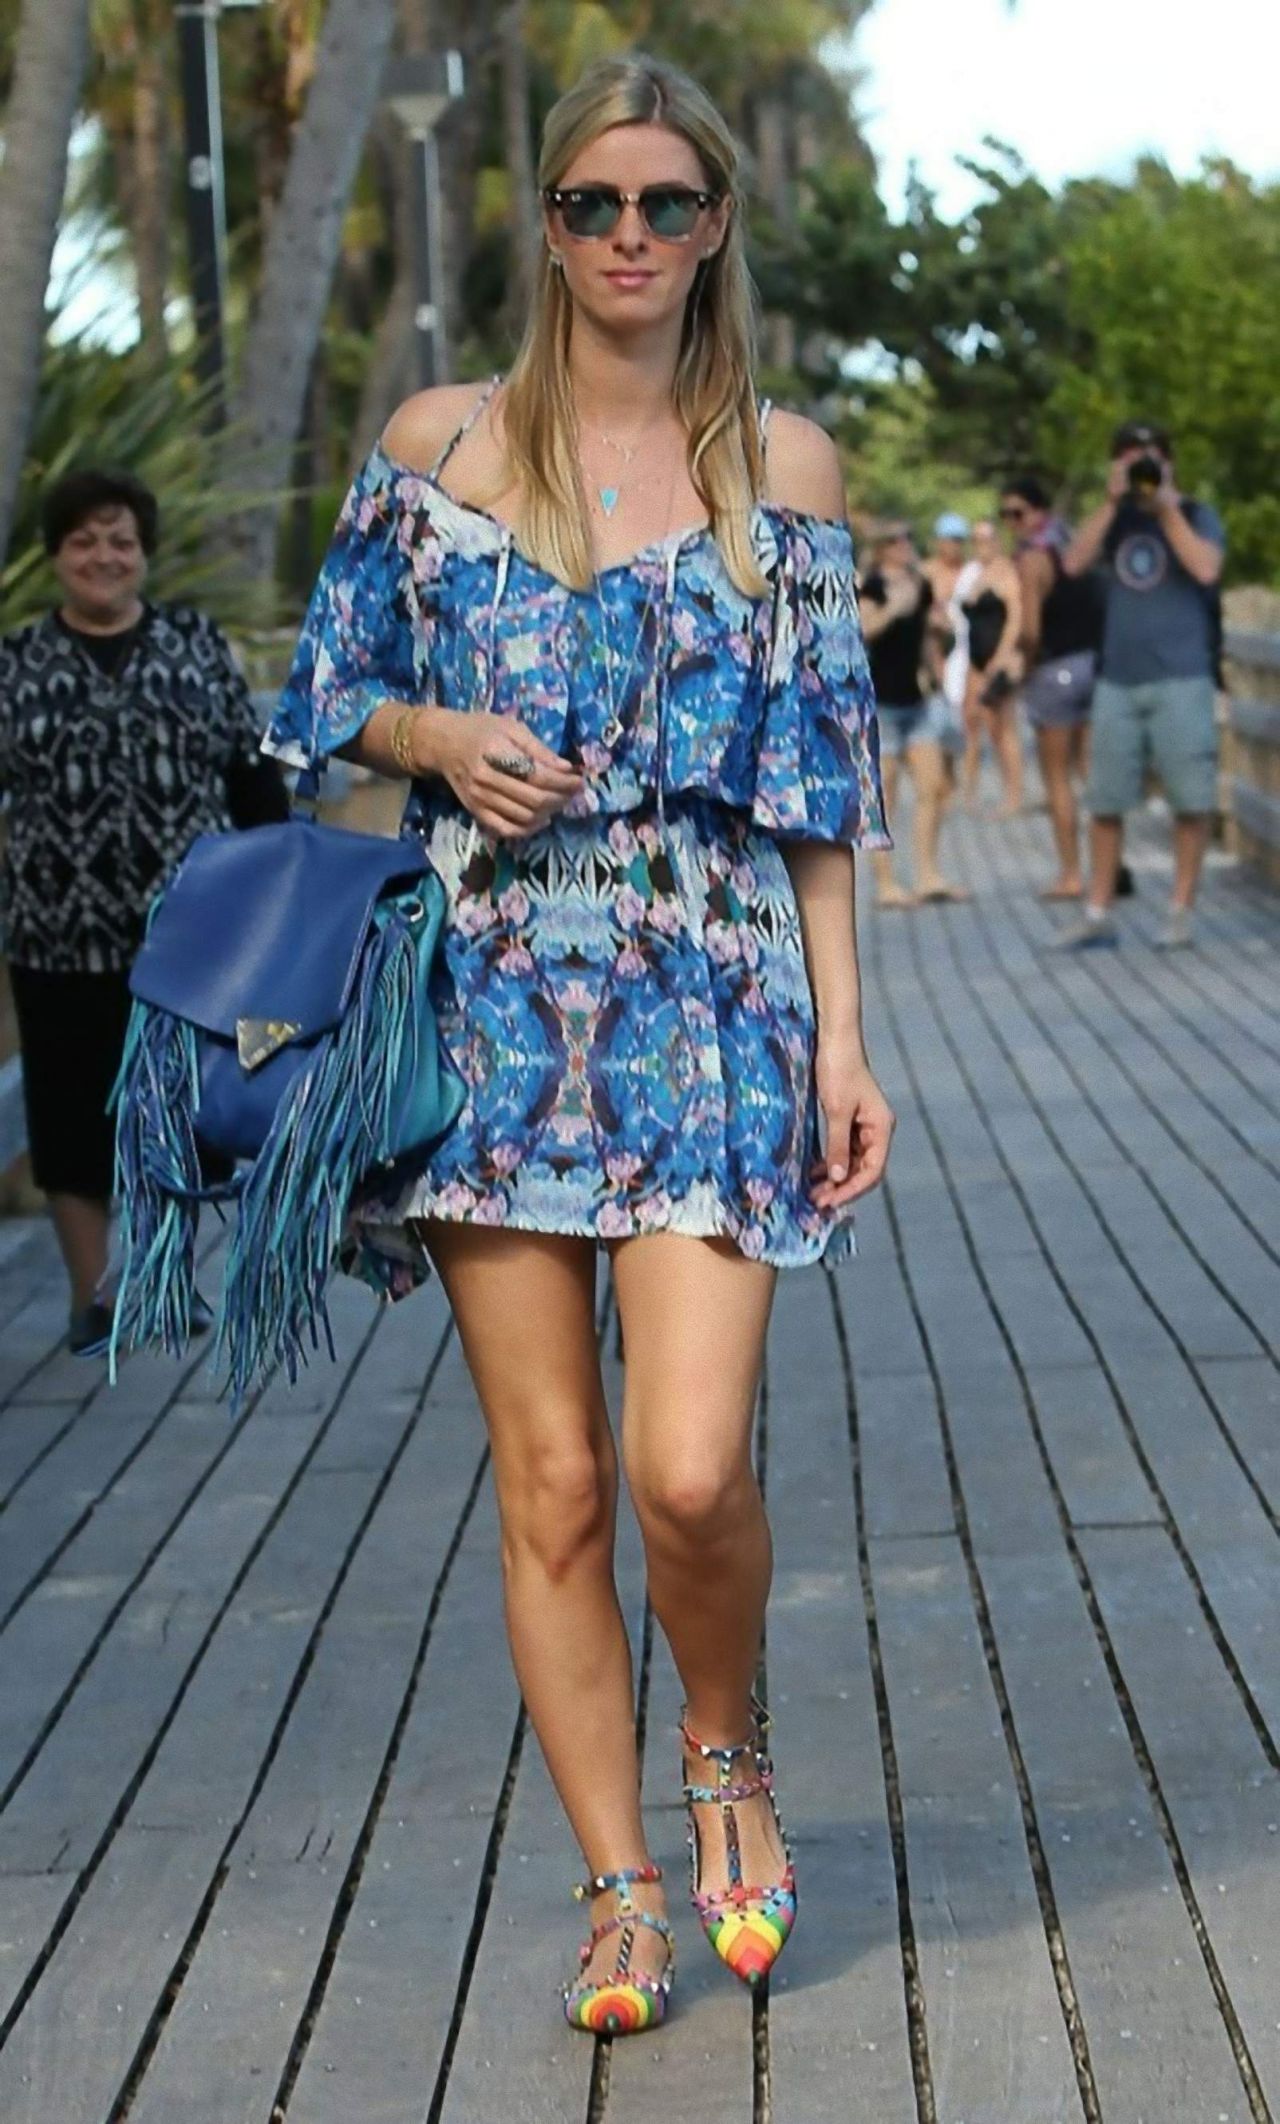 Nicky Hilton in Summer Dress - Out In Miami, December 2014 • CelebMafia